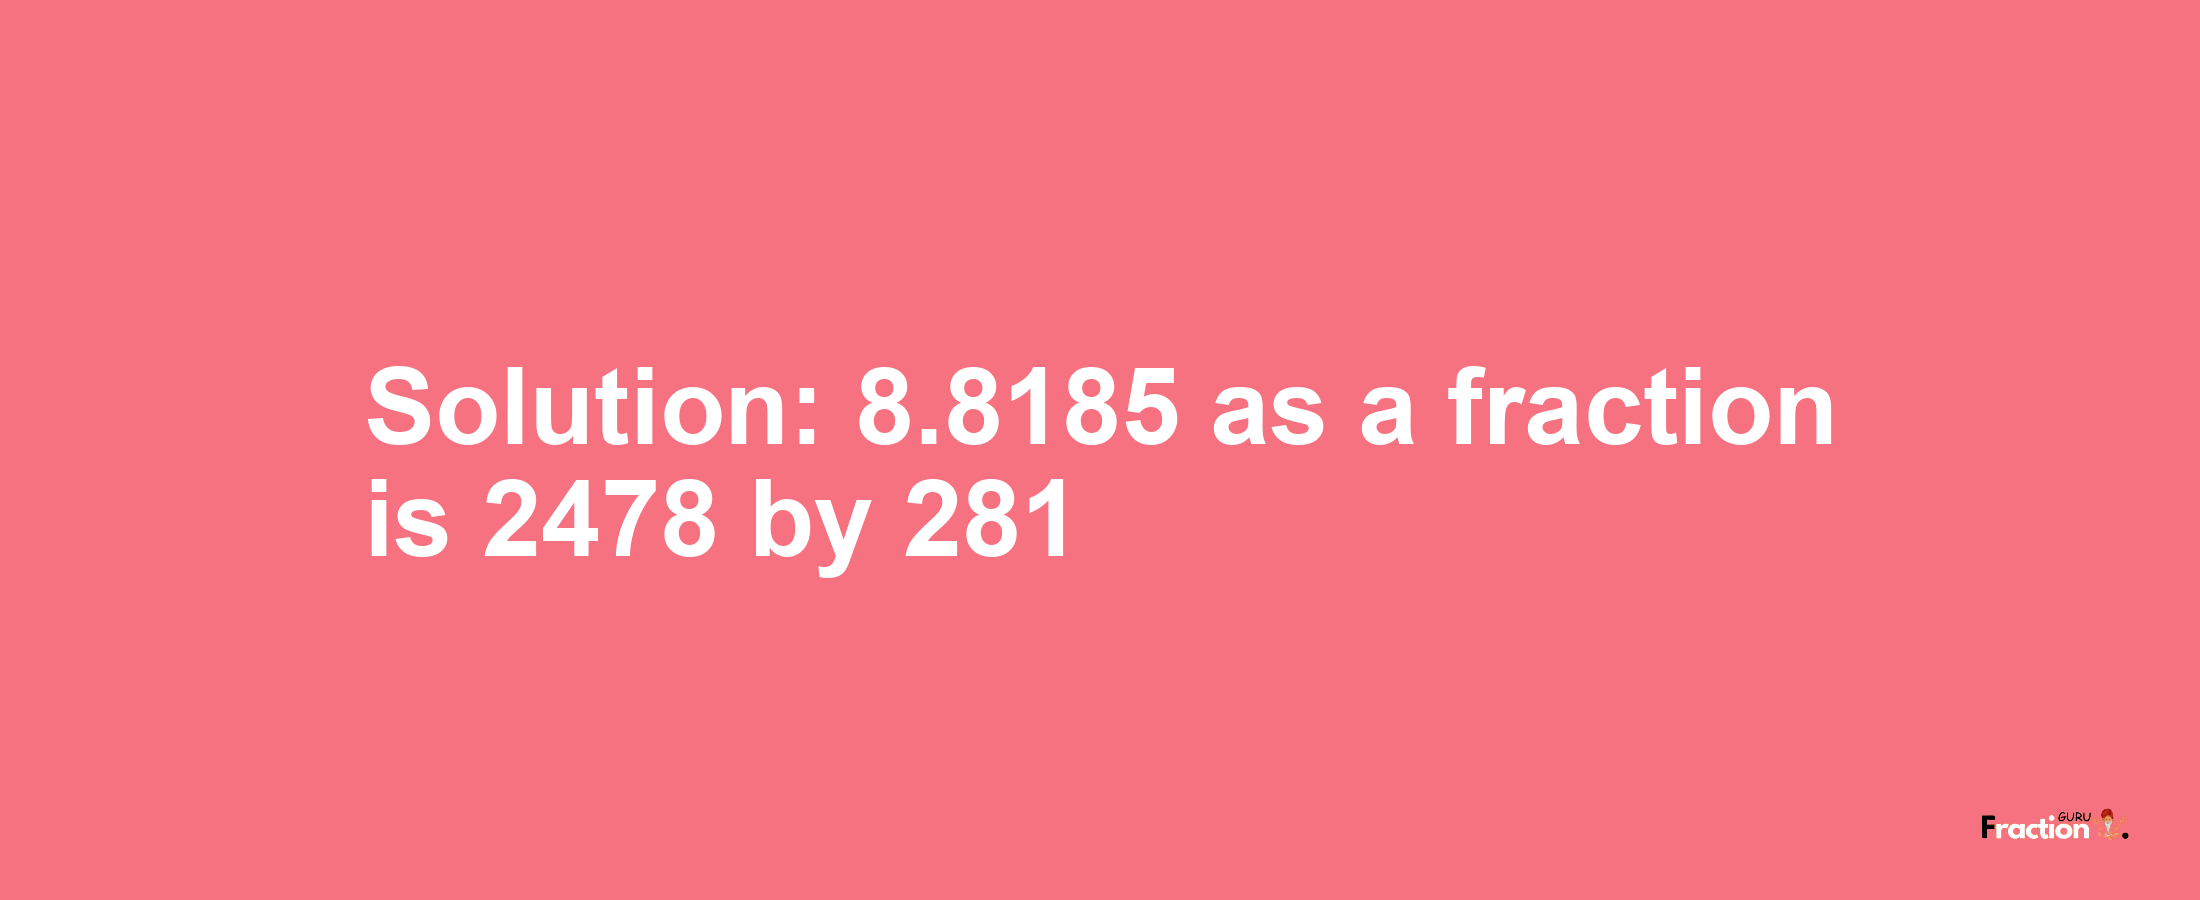 Solution:8.8185 as a fraction is 2478/281